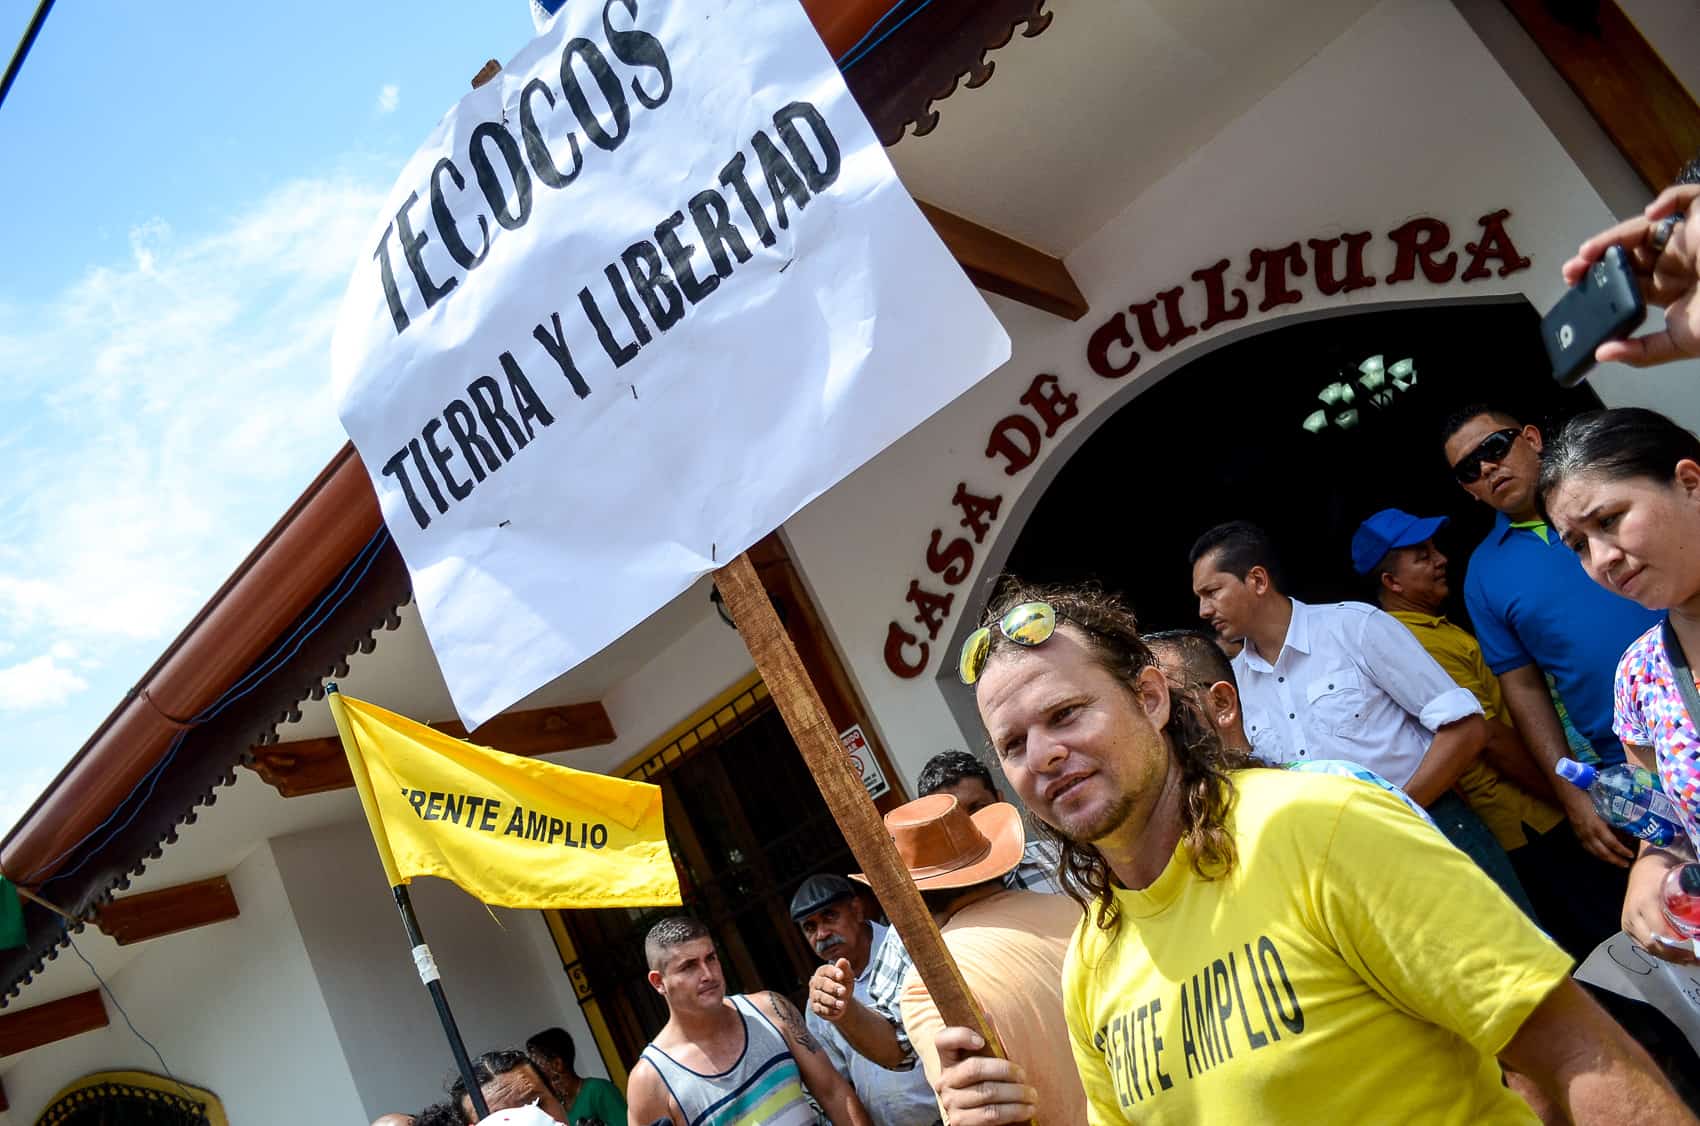 Protests at Costa Rica's Annexation of Nicoya